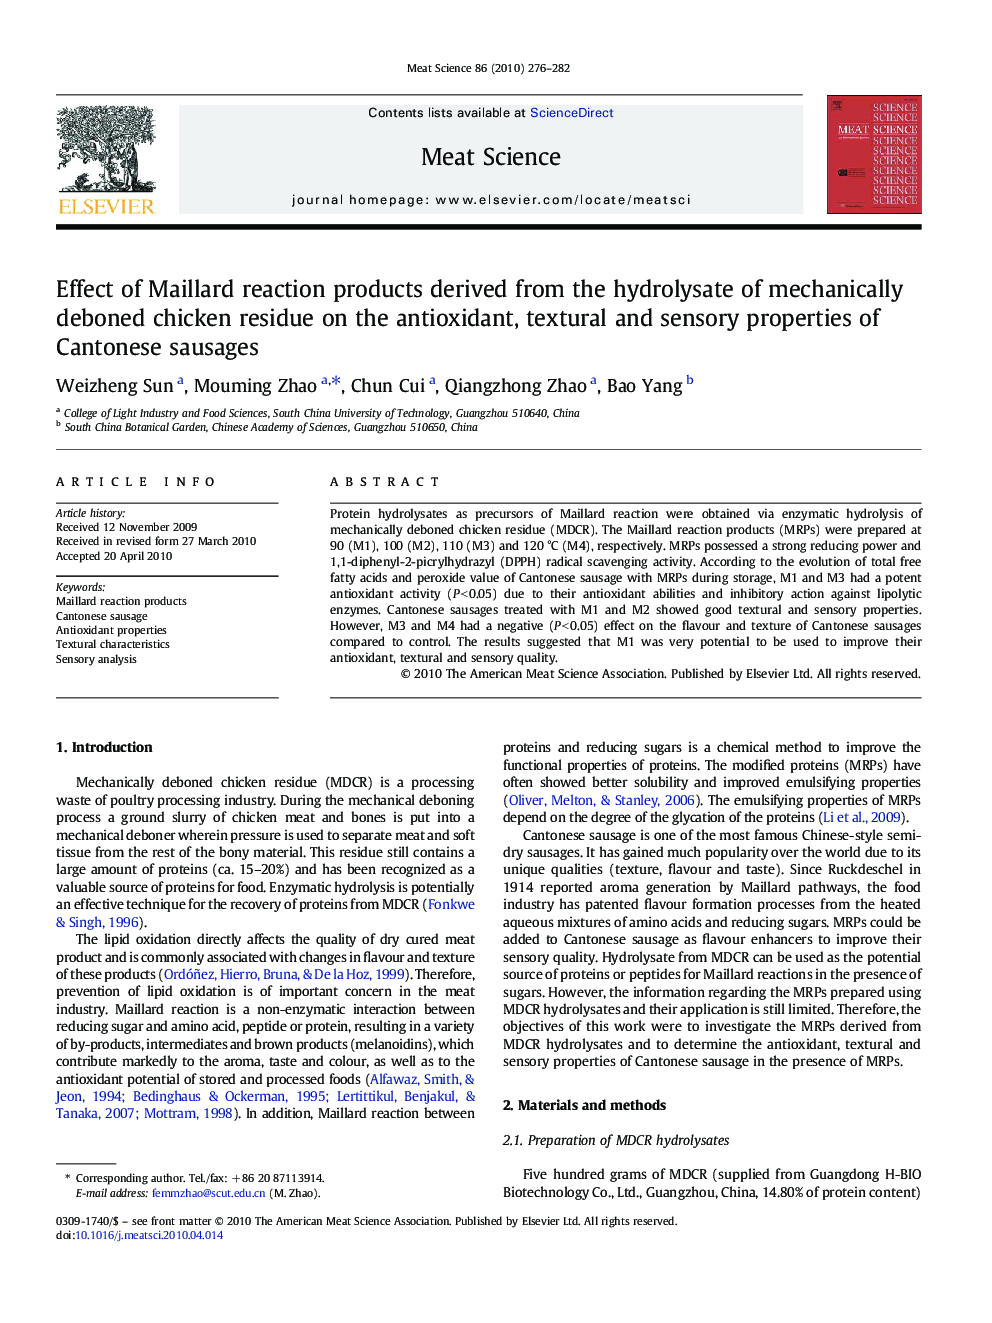 Effect of Maillard reaction products derived from the hydrolysate of mechanically deboned chicken residue on the antioxidant, textural and sensory properties of Cantonese sausages